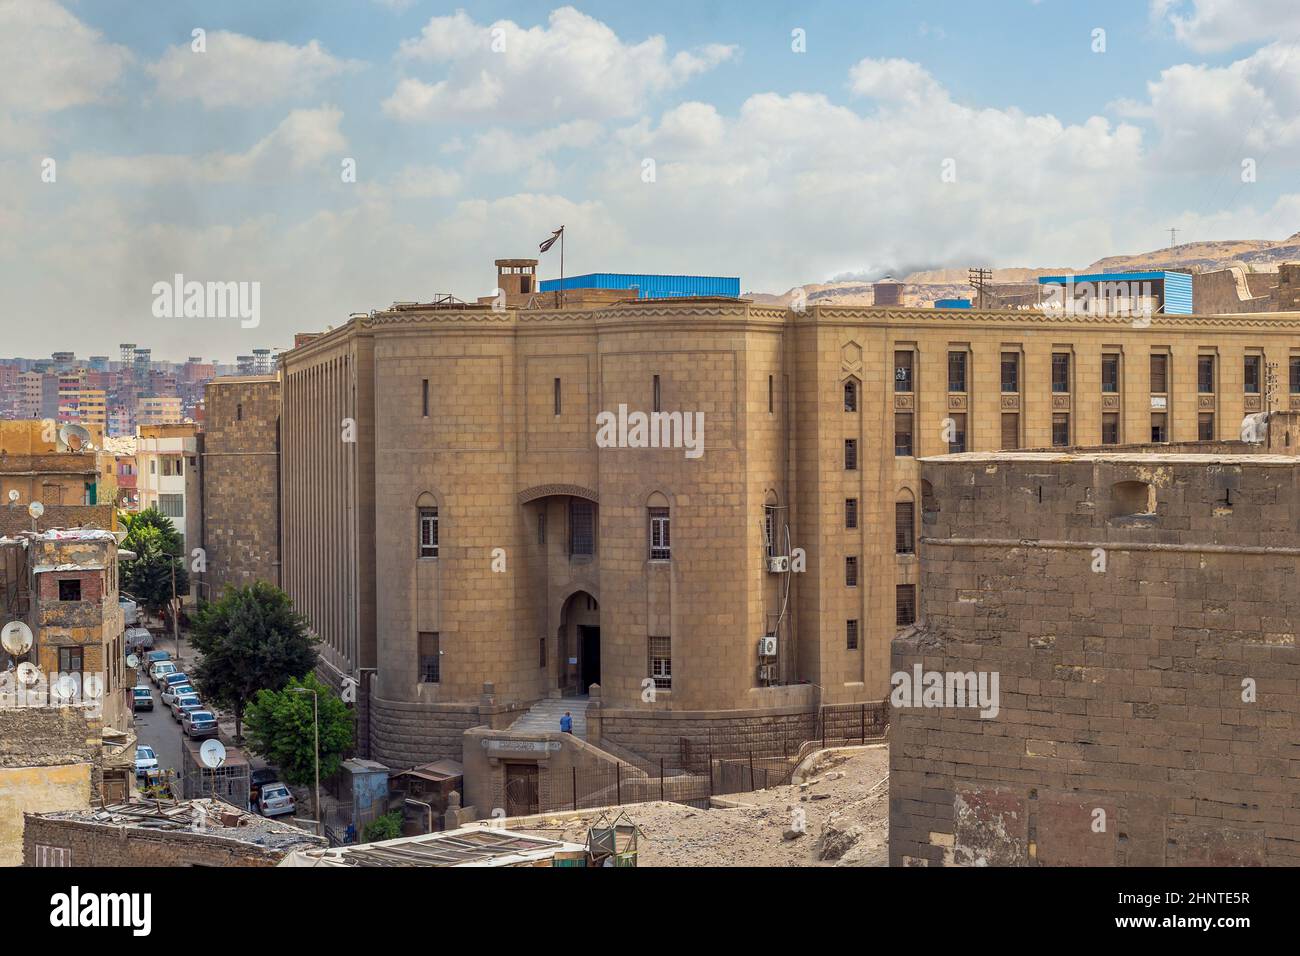 The National Archives of Egypt, aka The Egyptian House of Documentation, located in the Citadel of Cairo, Egypt Stock Photo